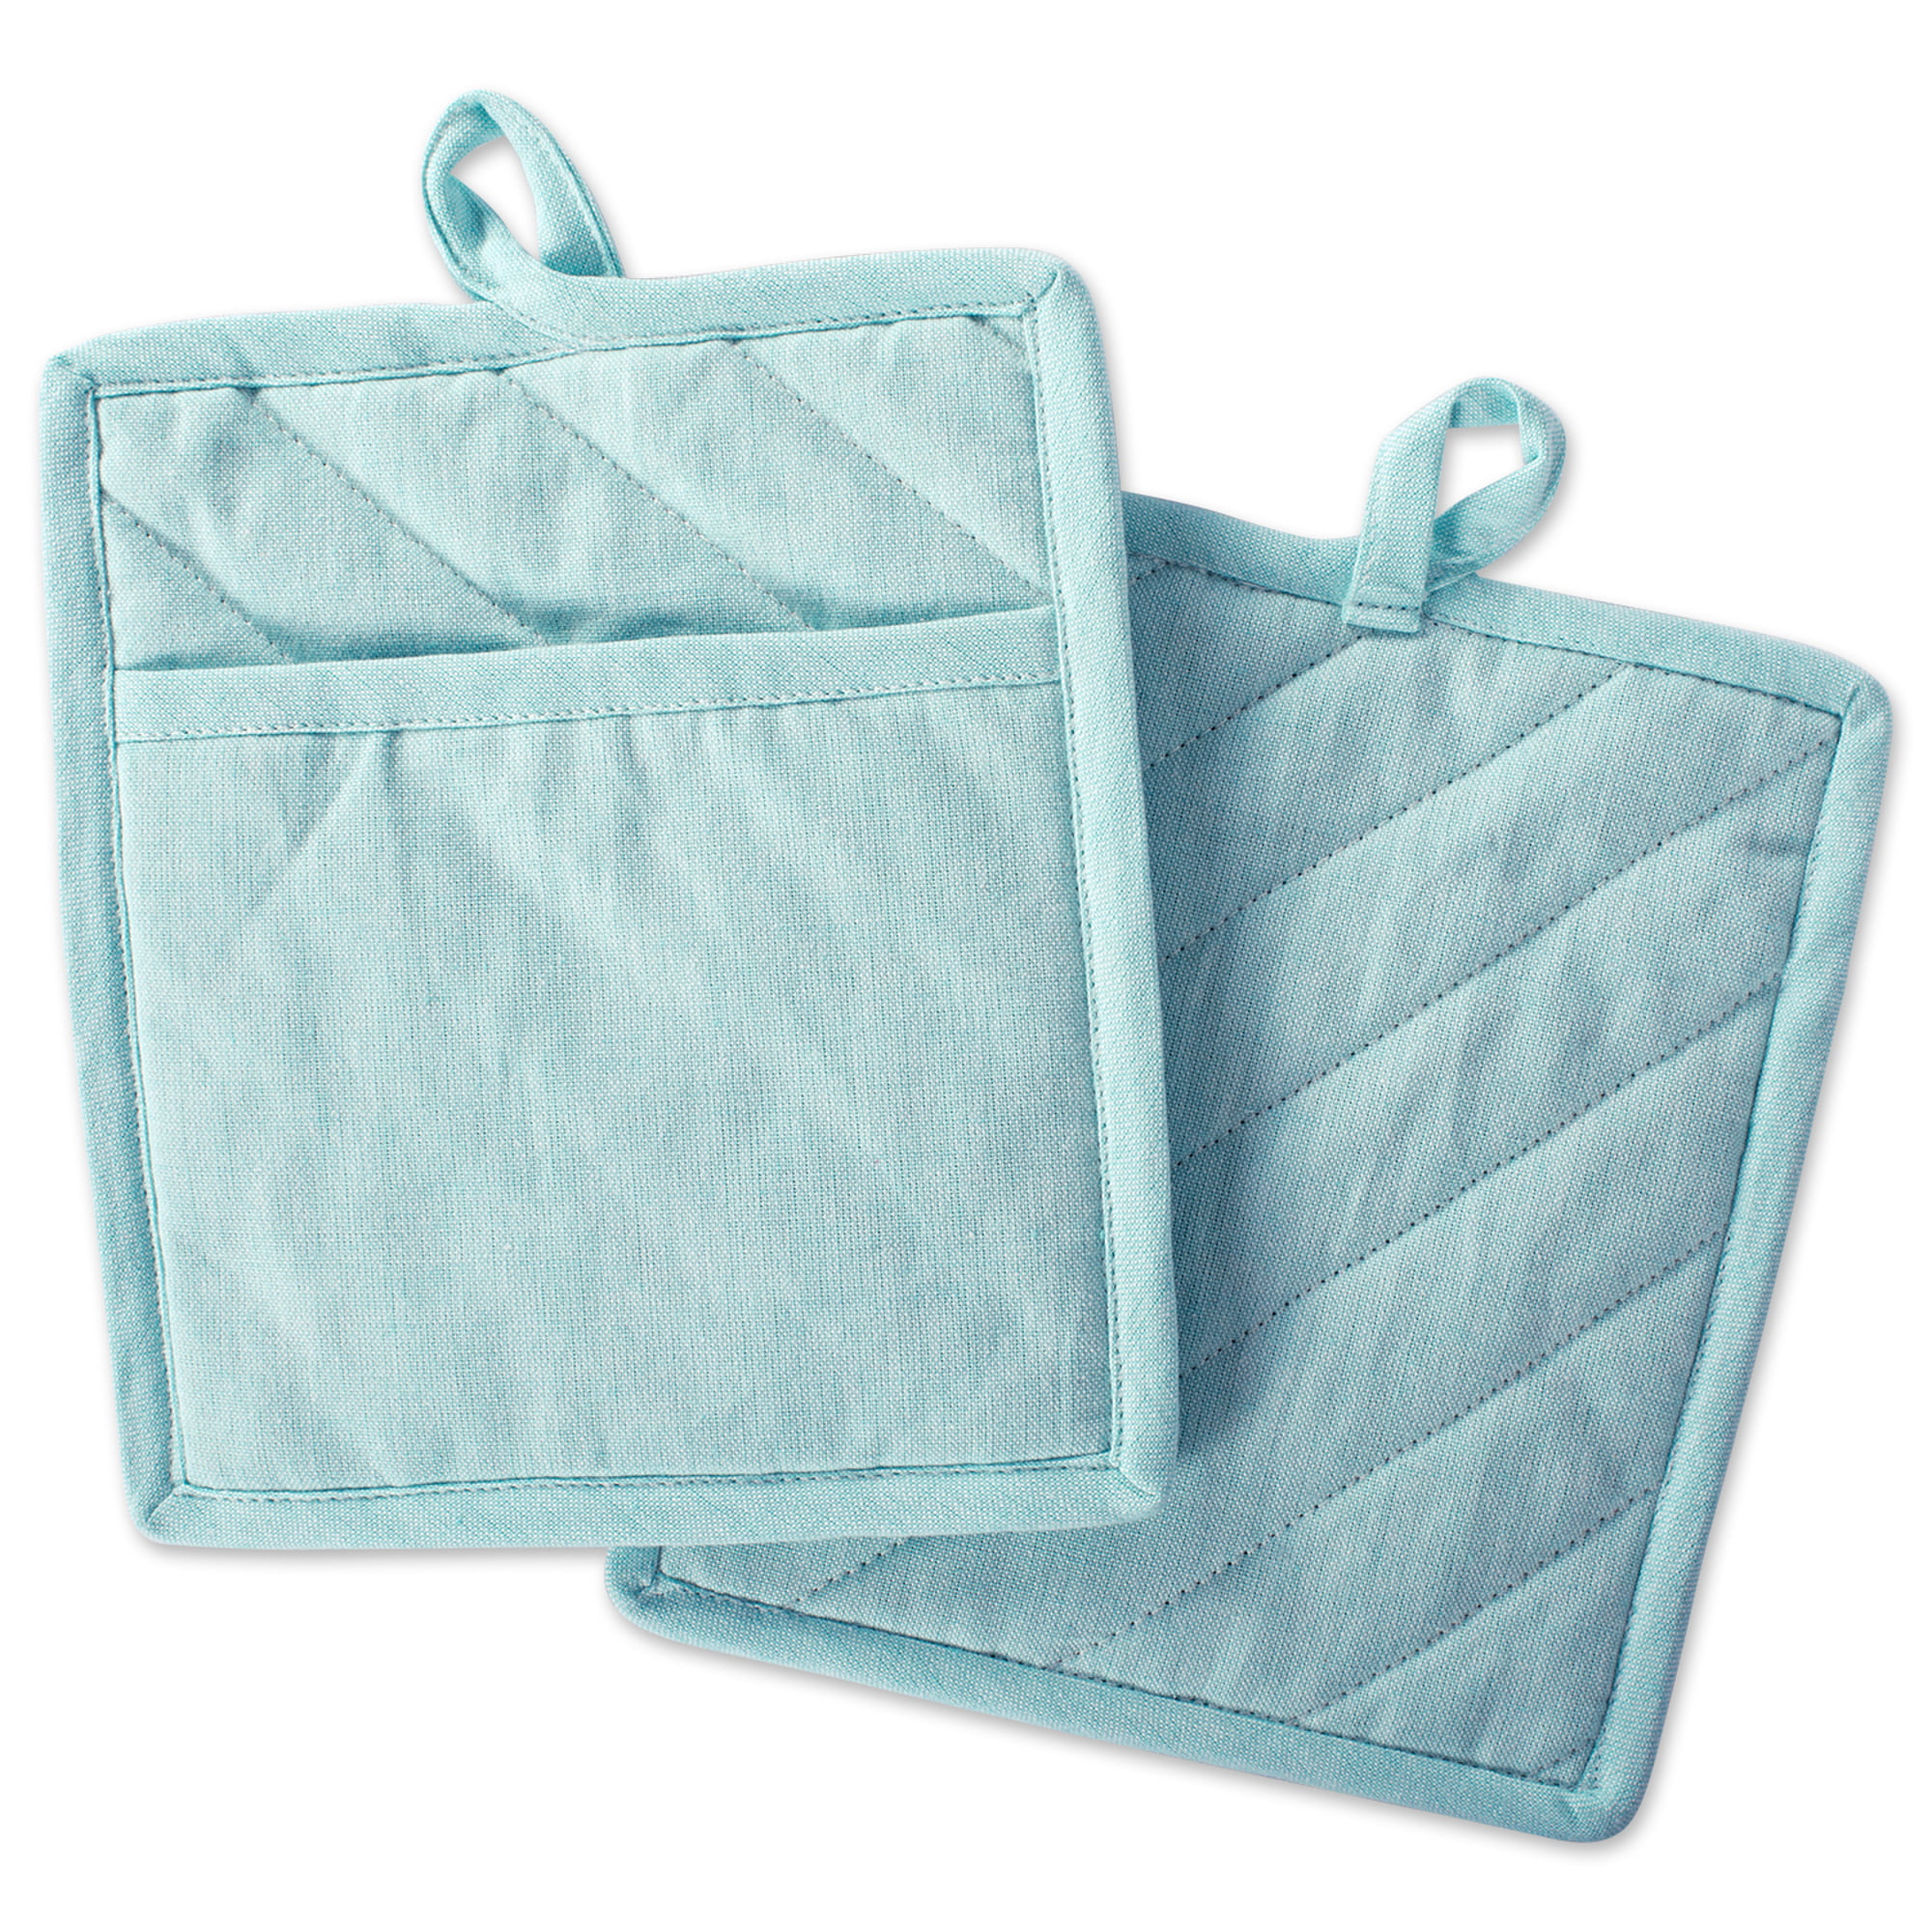 POT HOLDERS   SET OF 2  ASSORTED COLORS 